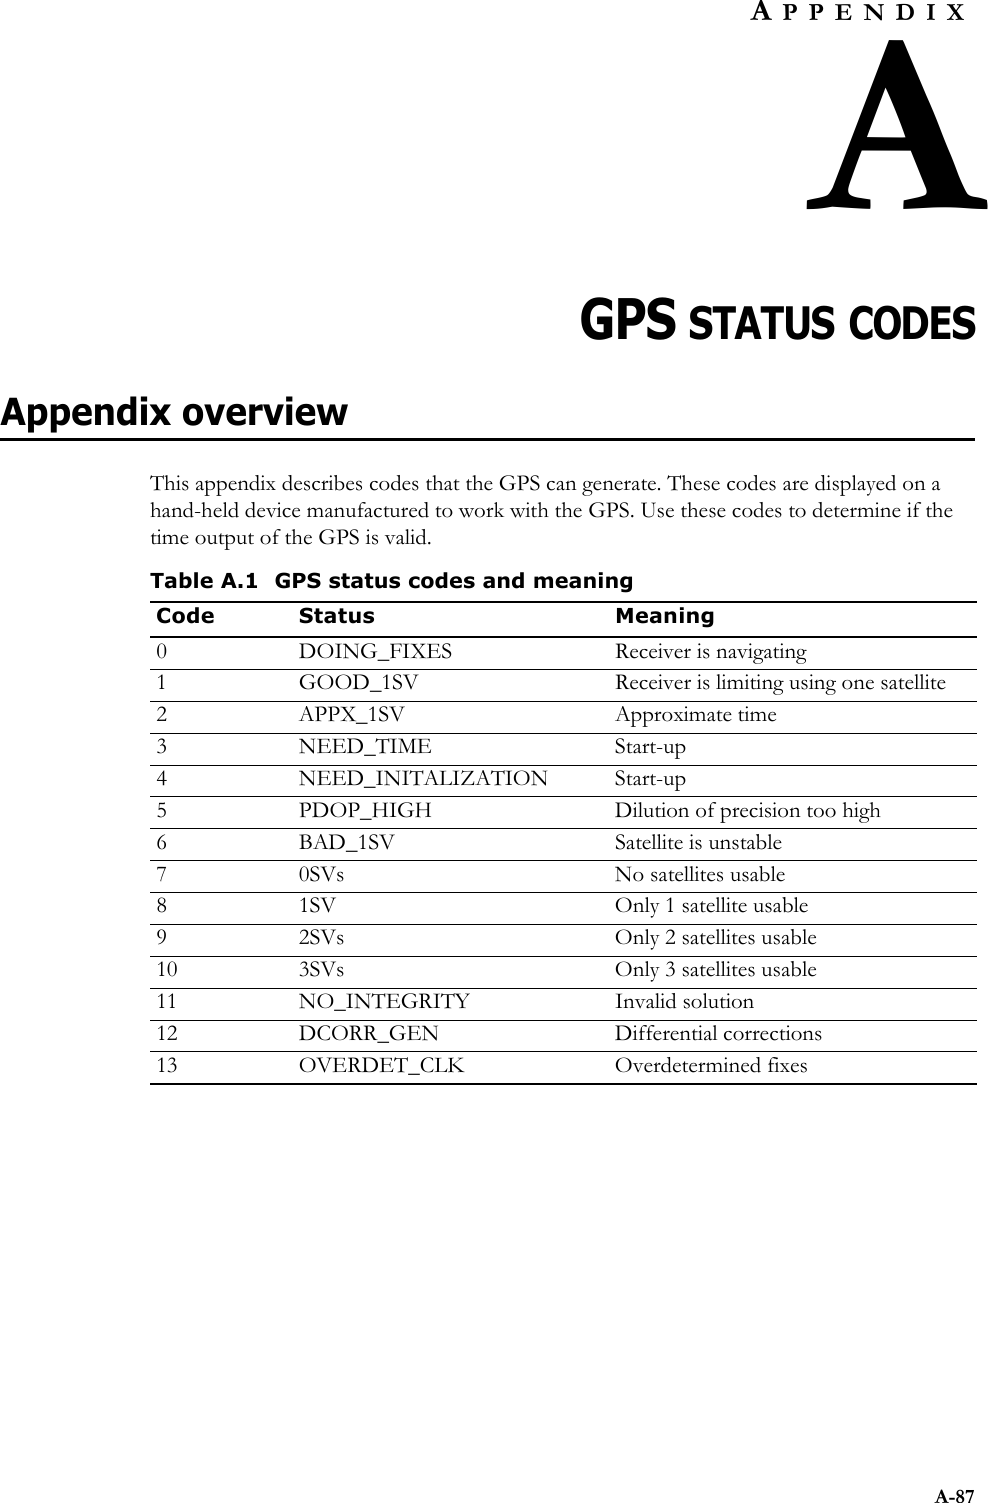 A-87APPENDIXACHAPTER 0GPS STATUS CODESAppendix overviewThis appendix describes codes that the GPS can generate. These codes are displayed on a hand-held device manufactured to work with the GPS. Use these codes to determine if the time output of the GPS is valid. Table A.1 GPS status codes and meaningCode Status Meaning0 DOING_FIXES Receiver is navigating1 GOOD_1SV Receiver is limiting using one satellite2 APPX_1SV Approximate time3 NEED_TIME Start-up4 NEED_INITALIZATION Start-up5 PDOP_HIGH Dilution of precision too high6 BAD_1SV Satellite is unstable7 0SVs No satellites usable8 1SV Only 1 satellite usable9 2SVs Only 2 satellites usable10 3SVs Only 3 satellites usable11 NO_INTEGRITY Invalid solution12 DCORR_GEN Differential corrections13 OVERDET_CLK Overdetermined fixes